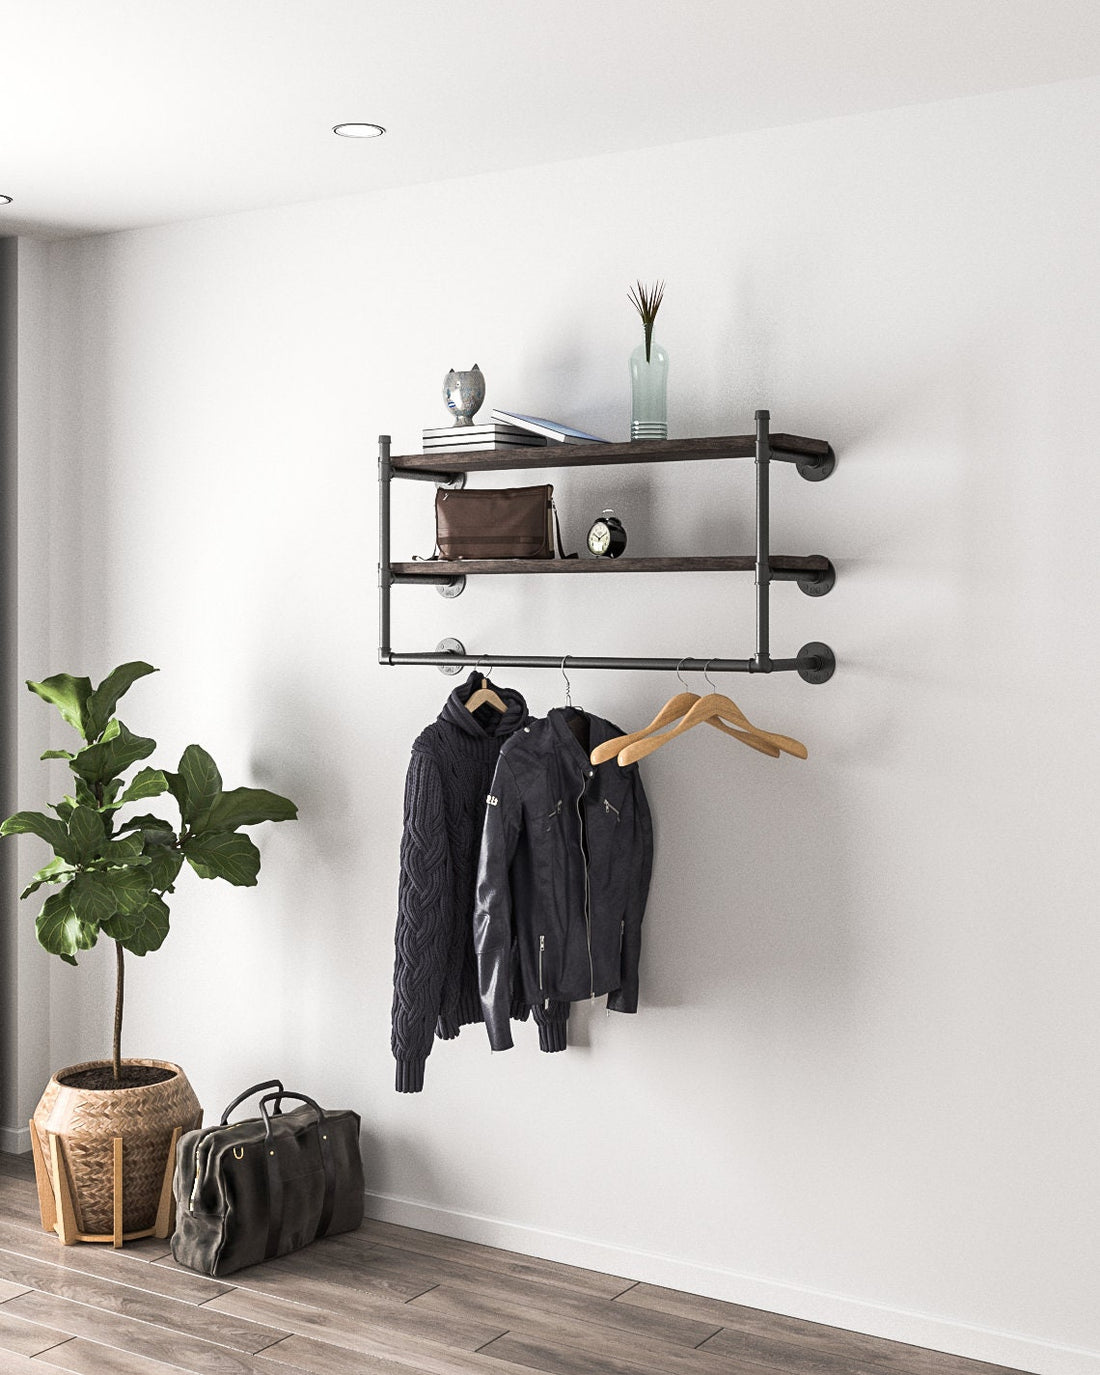 Retro Clothing Rack with Wood Shelves, a wall-mounted garment storage solution with shelves for shoes, hats, and other items, easy to assemble and install.